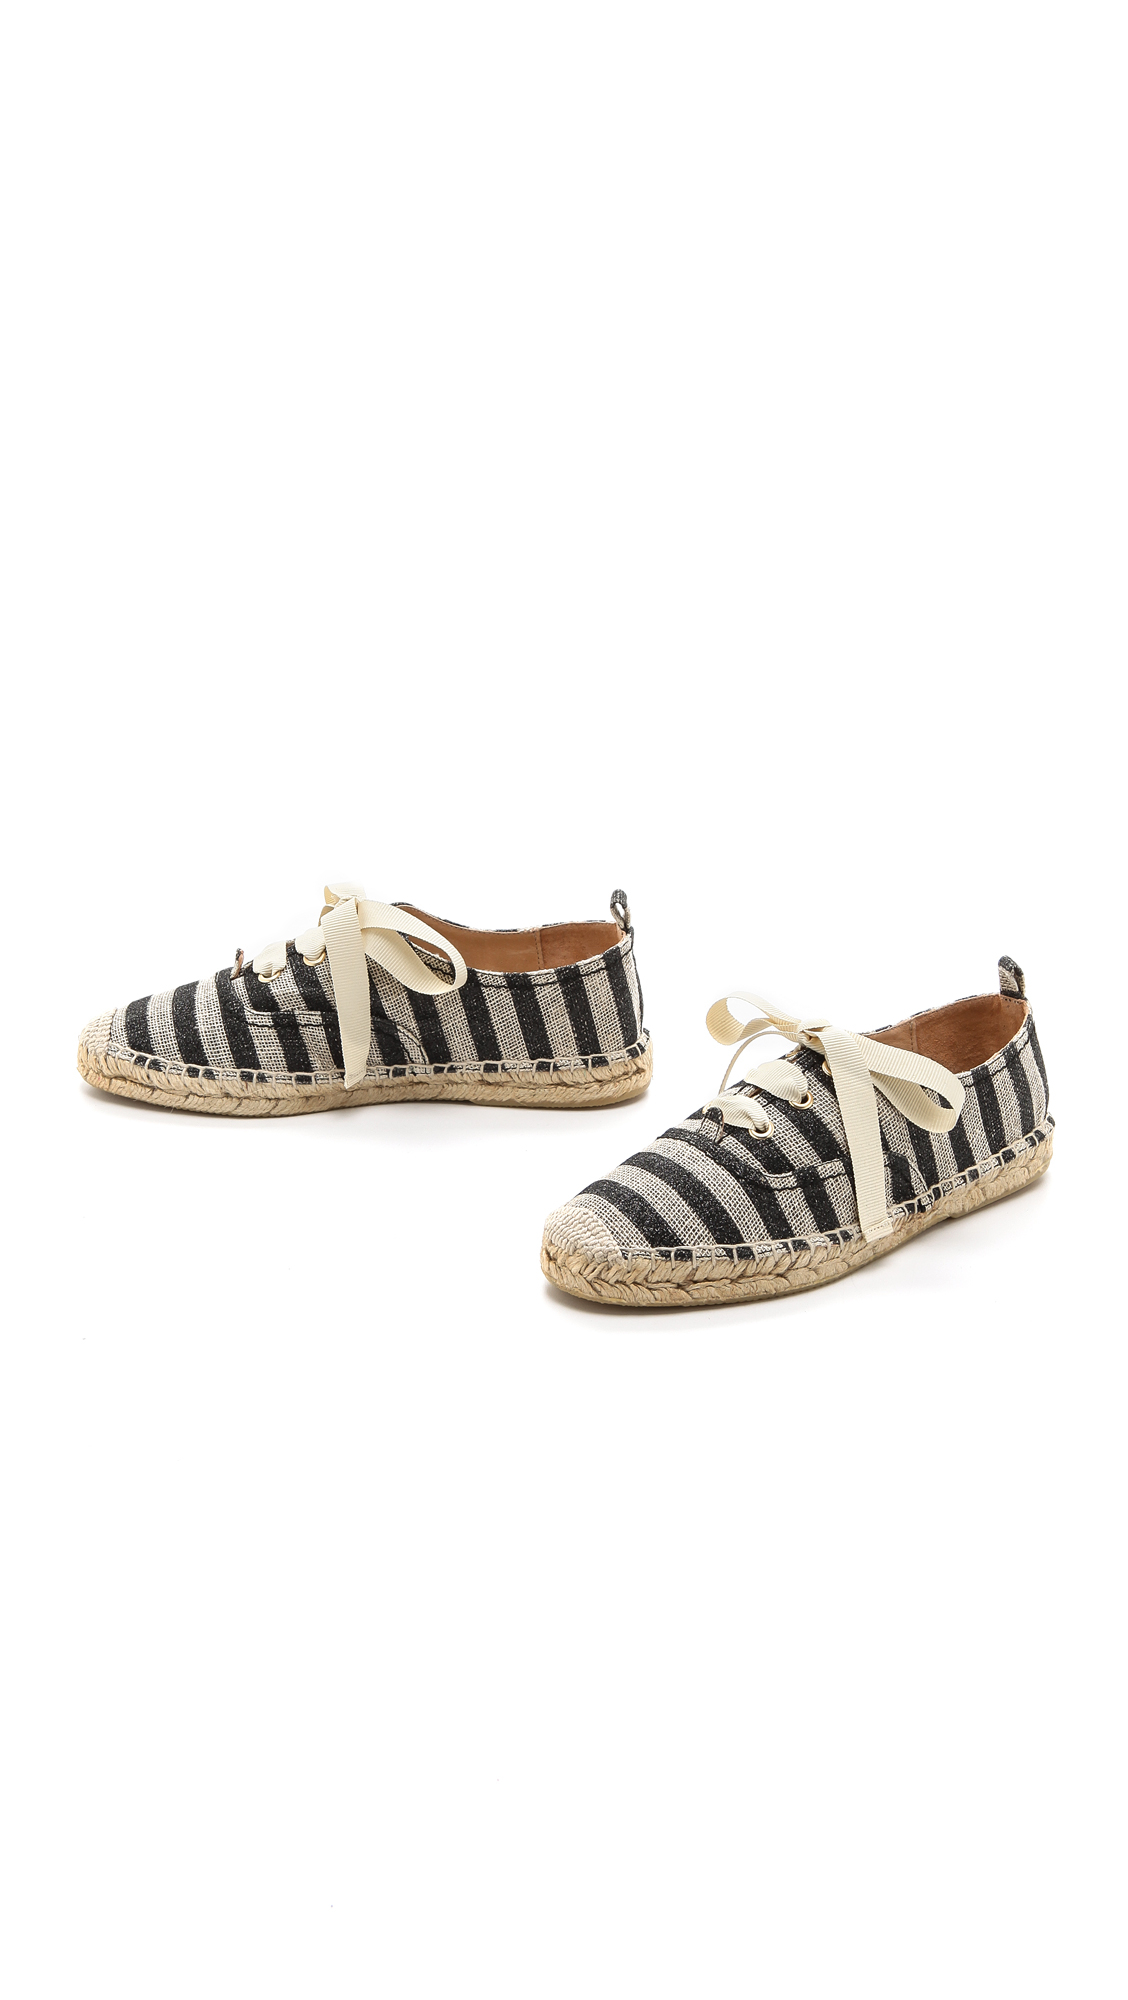 Lyst - Kate spade new york Lina Lace Up Striped Espadrilles in White